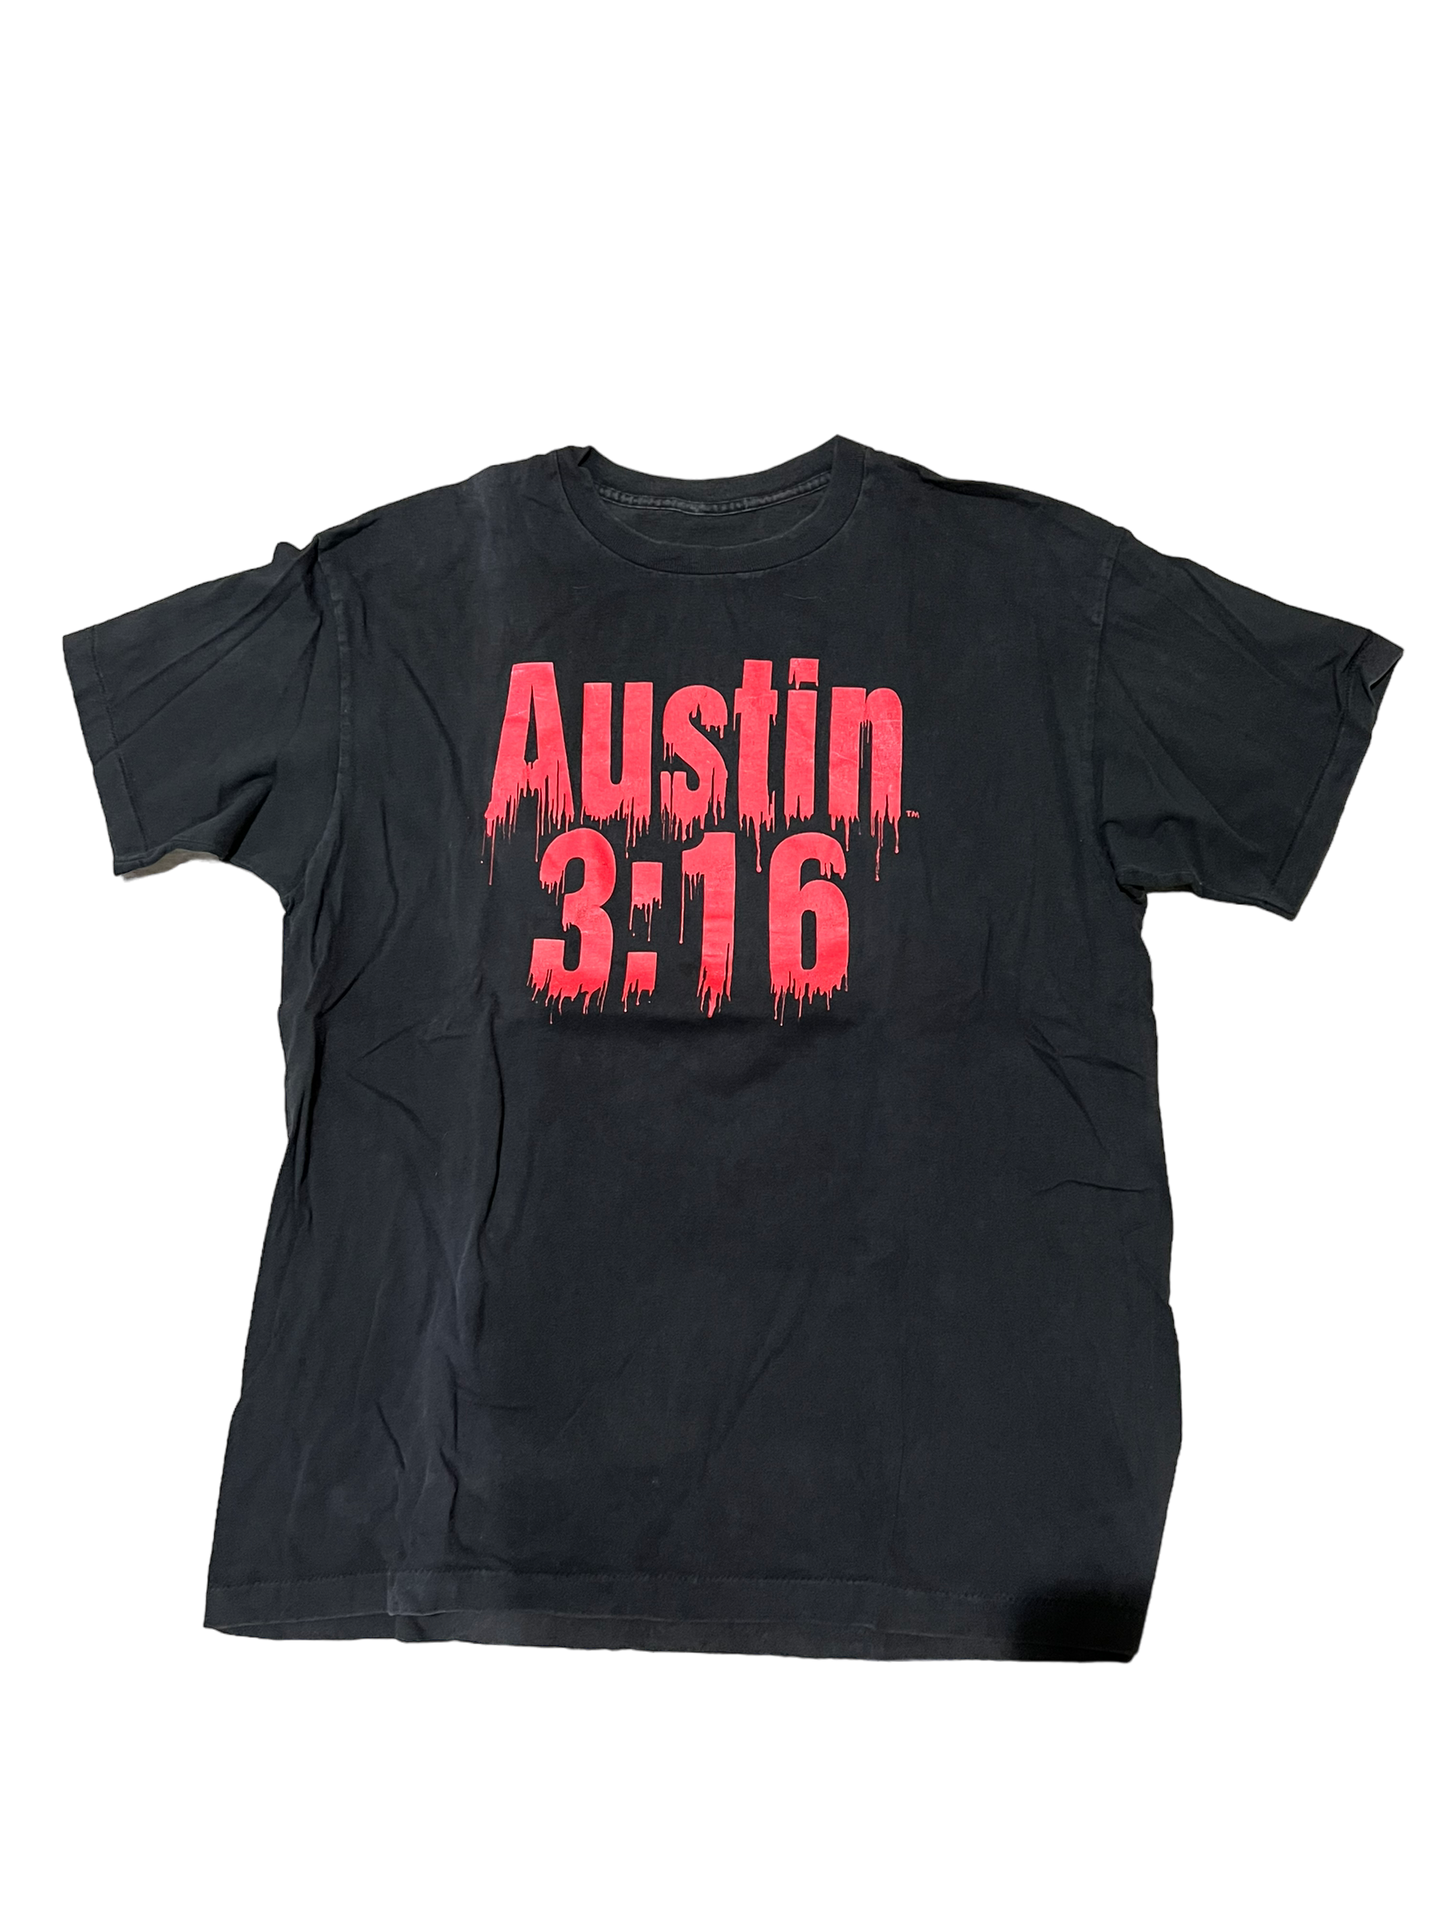 Austin 3:16 Blood from a Stone vintage tee